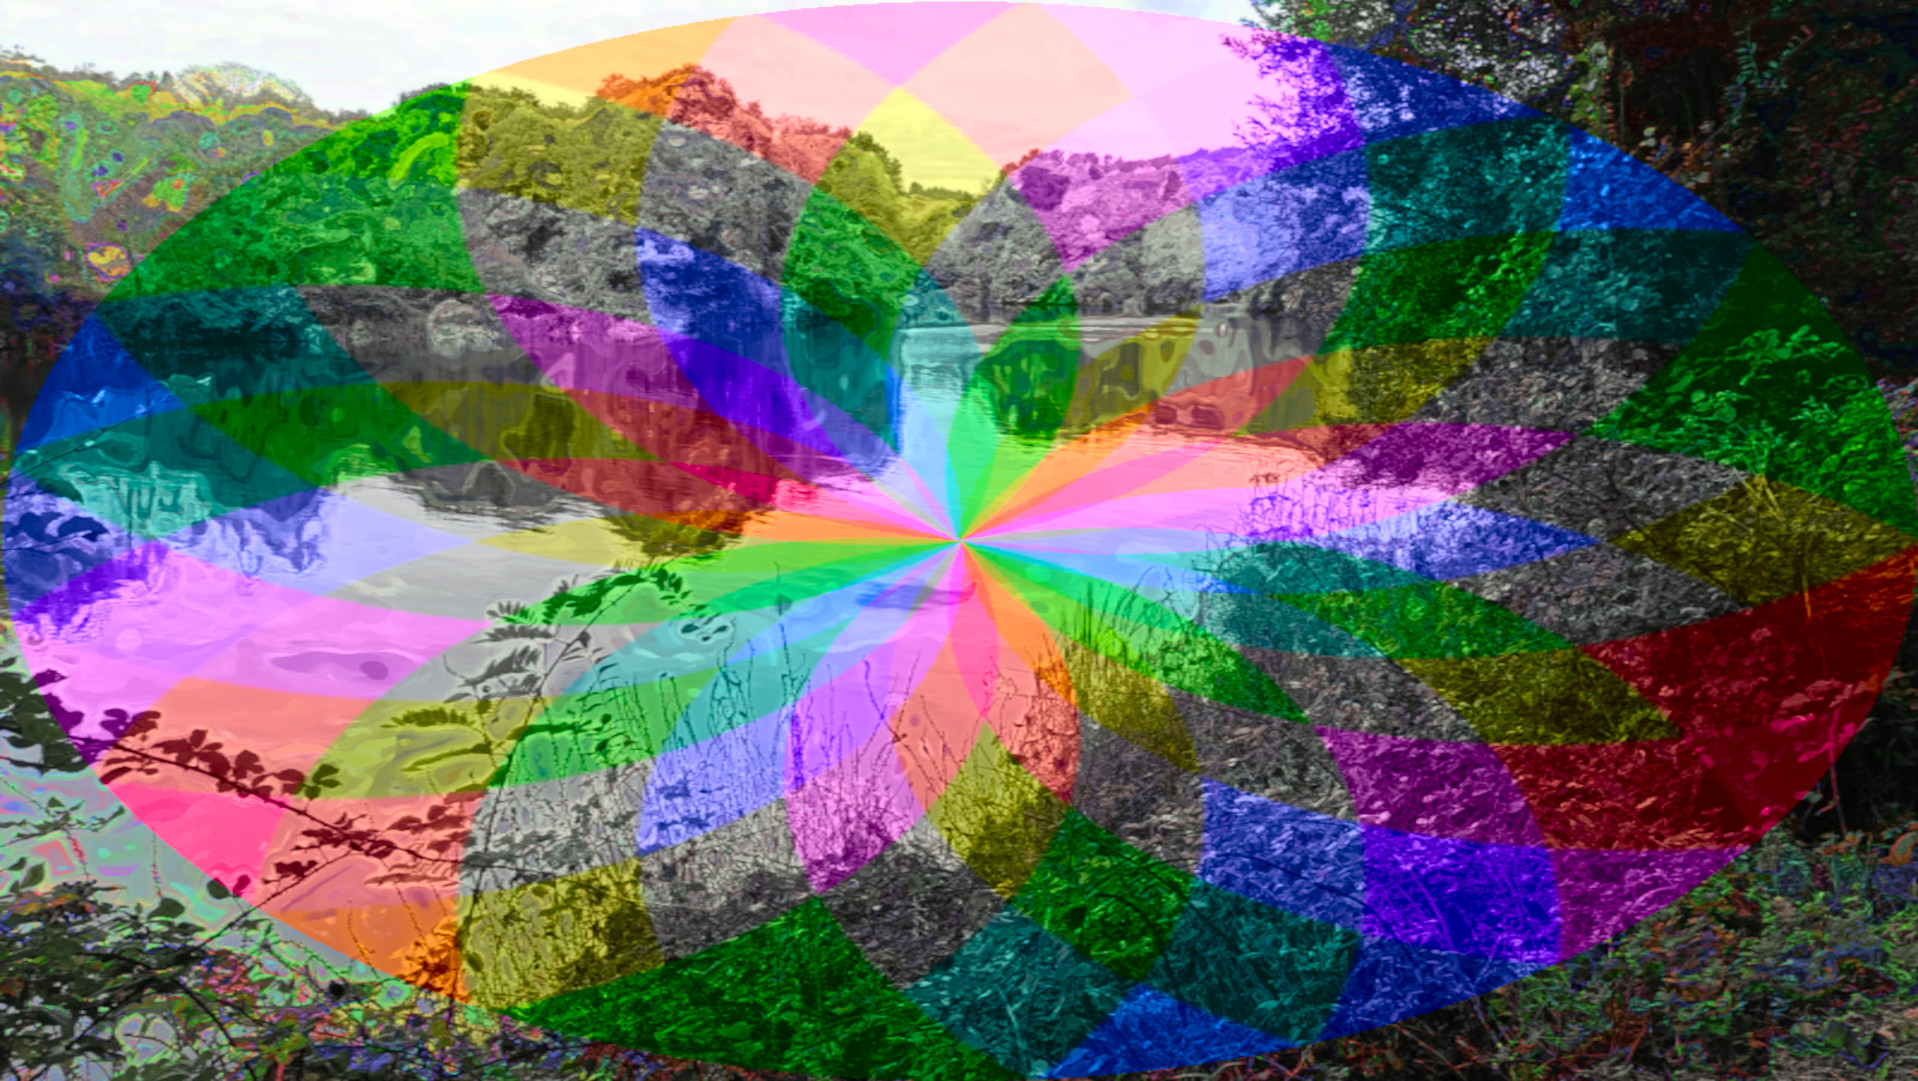 2023-10-14 21-09-51 bf8aa86f-3e1f-4070-9aa1-c24e3093f275 with a Quick Effect Y (Twisted_Rays) (abstr.mode=LAYER_MODE_HSL_COLOR.JPG